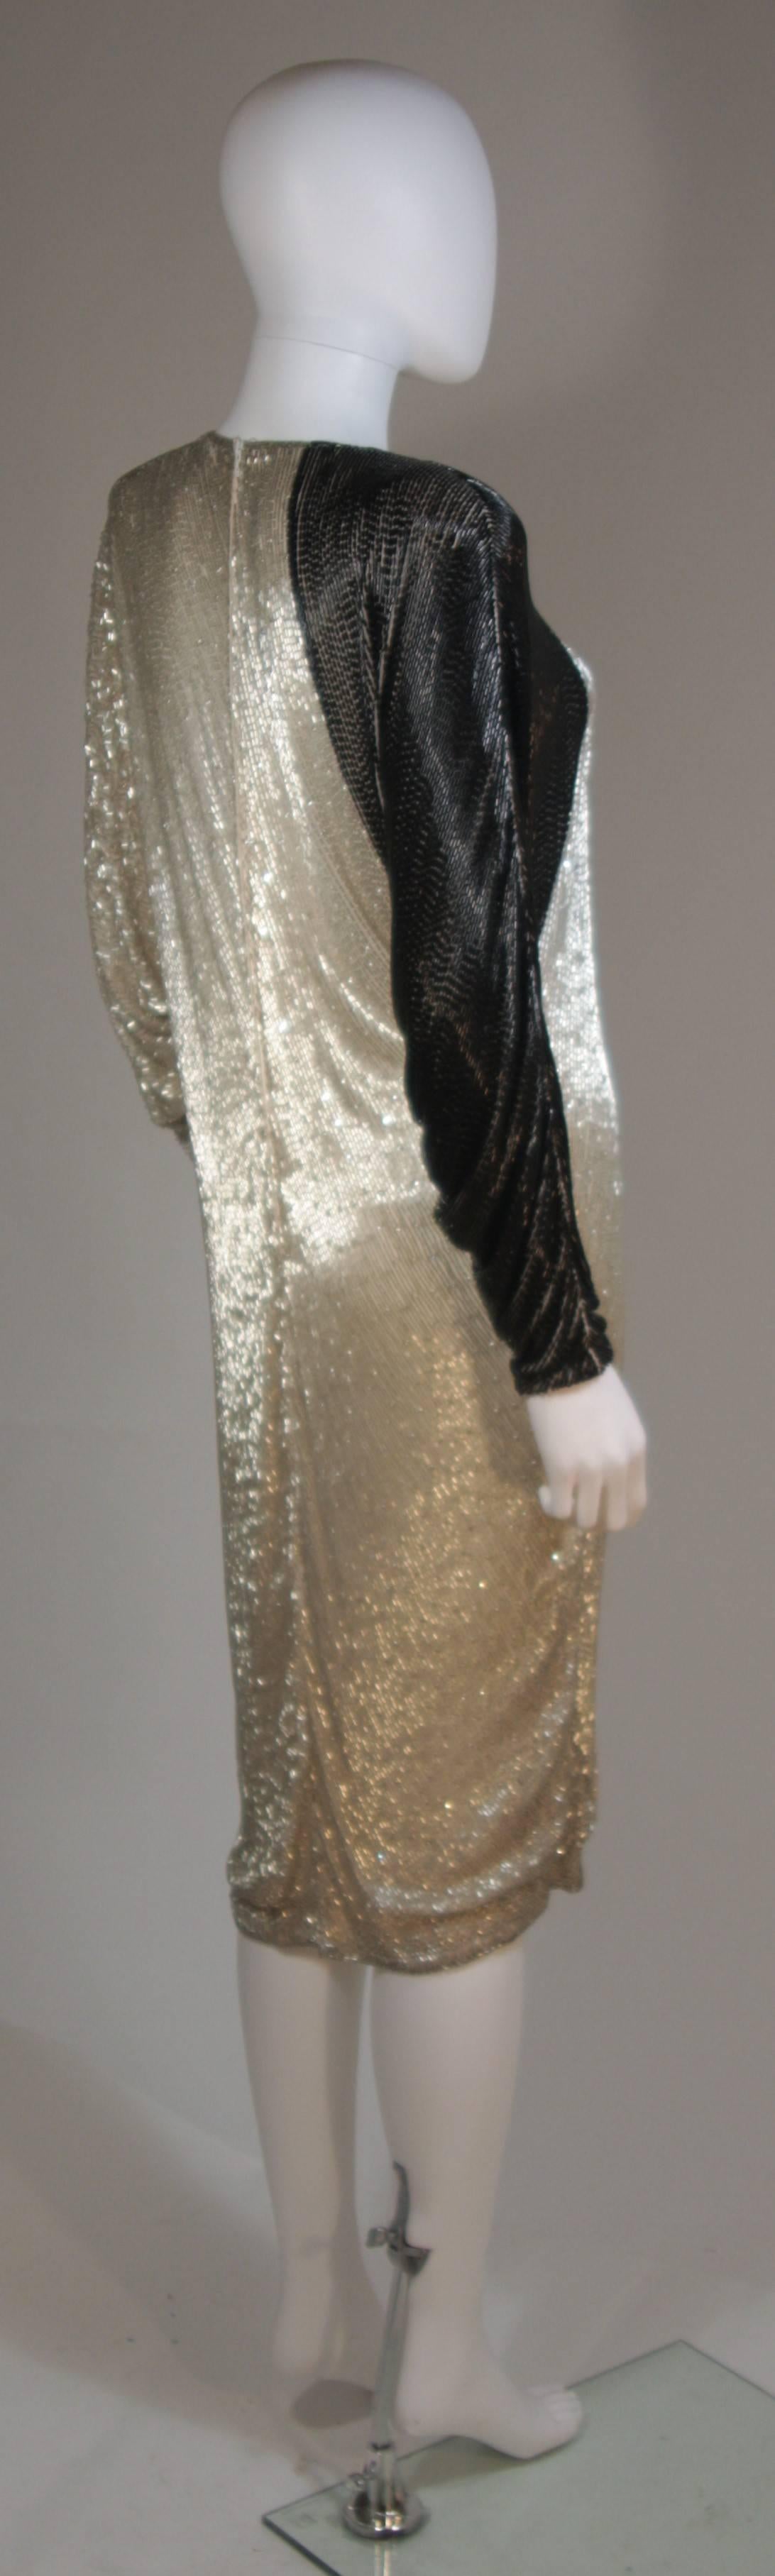 1980's Vintage Black & Silver Silk Cocktail Dress with Batwing Sleeves SIze 4-6 In Excellent Condition For Sale In Los Angeles, CA